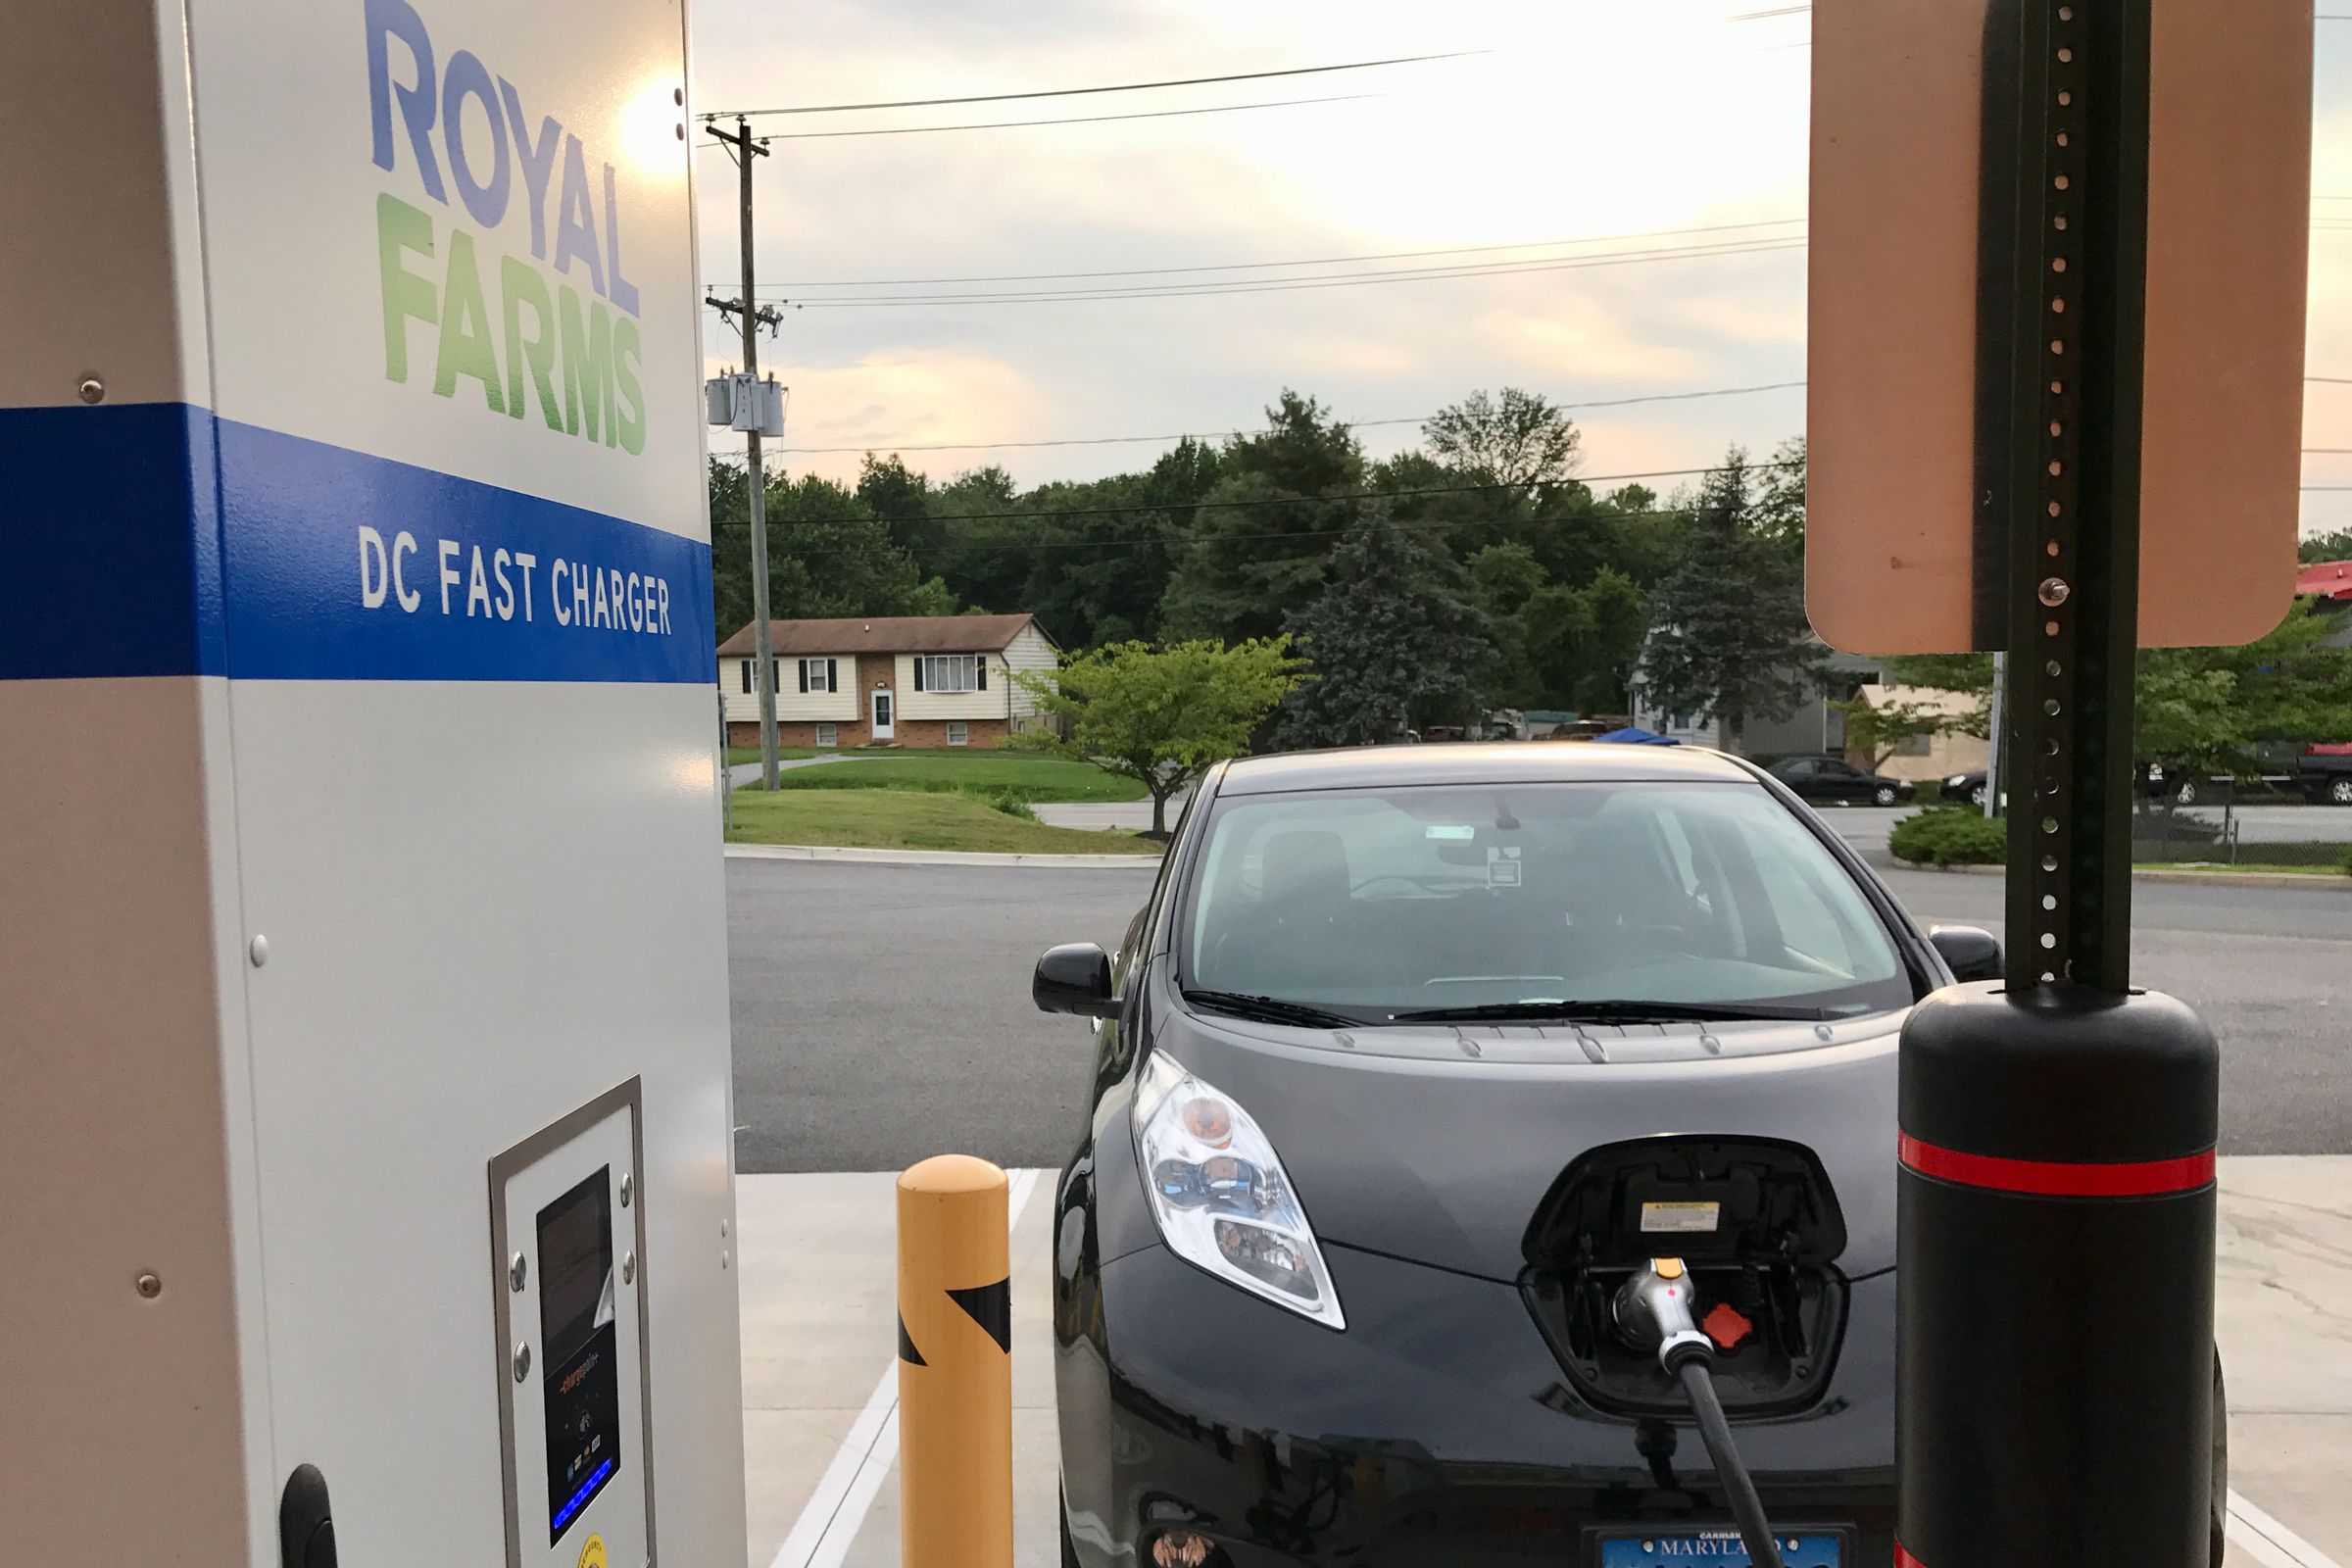 At sunset, a black Nissan Leaf is parked head on towards a Royal Farms DC Fast Charger. The CHAdeMO plug is already in the Leaf with its front latch open. There’s a small suburban house with many trees around in the background with an empty convenience store parking lot in the foreground.